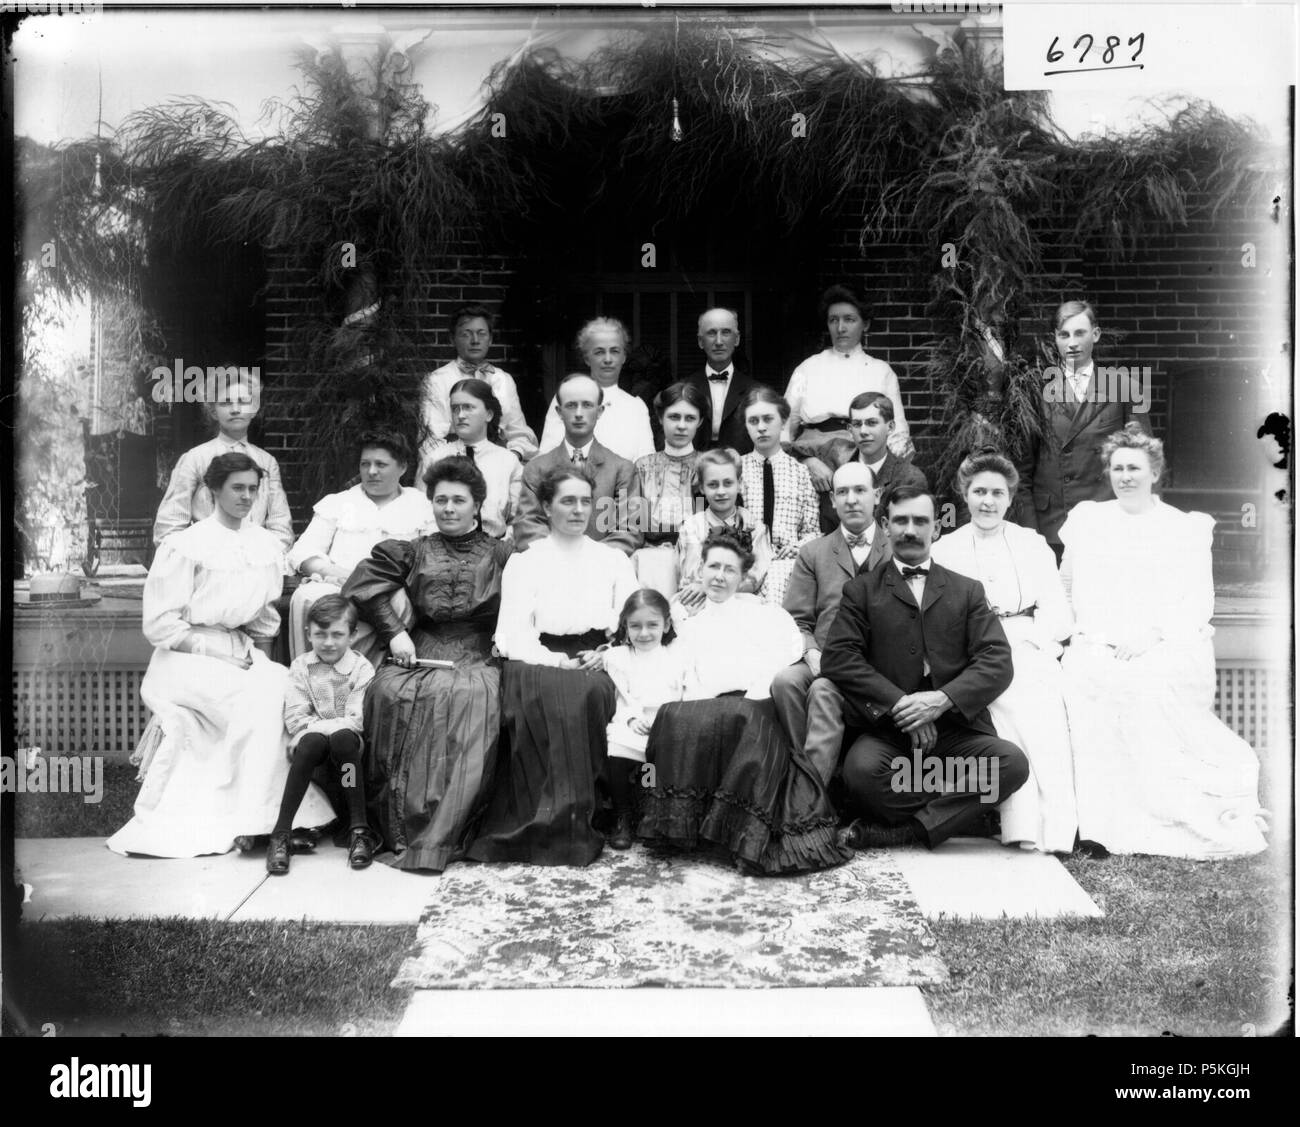 N/A. English: Persistent URL: digital.lib.muohio.edu/u/snyder,3724 Subject (TGM): Family; Families; Children and adults; Group portraits; Location: Oxford, Ohio  . June 1905. Snyder, Frank R. Flickr: Miami U. Libraries - Digital Collections 86 Allen Welsh family portrait 1905 (3194708663) Stock Photo